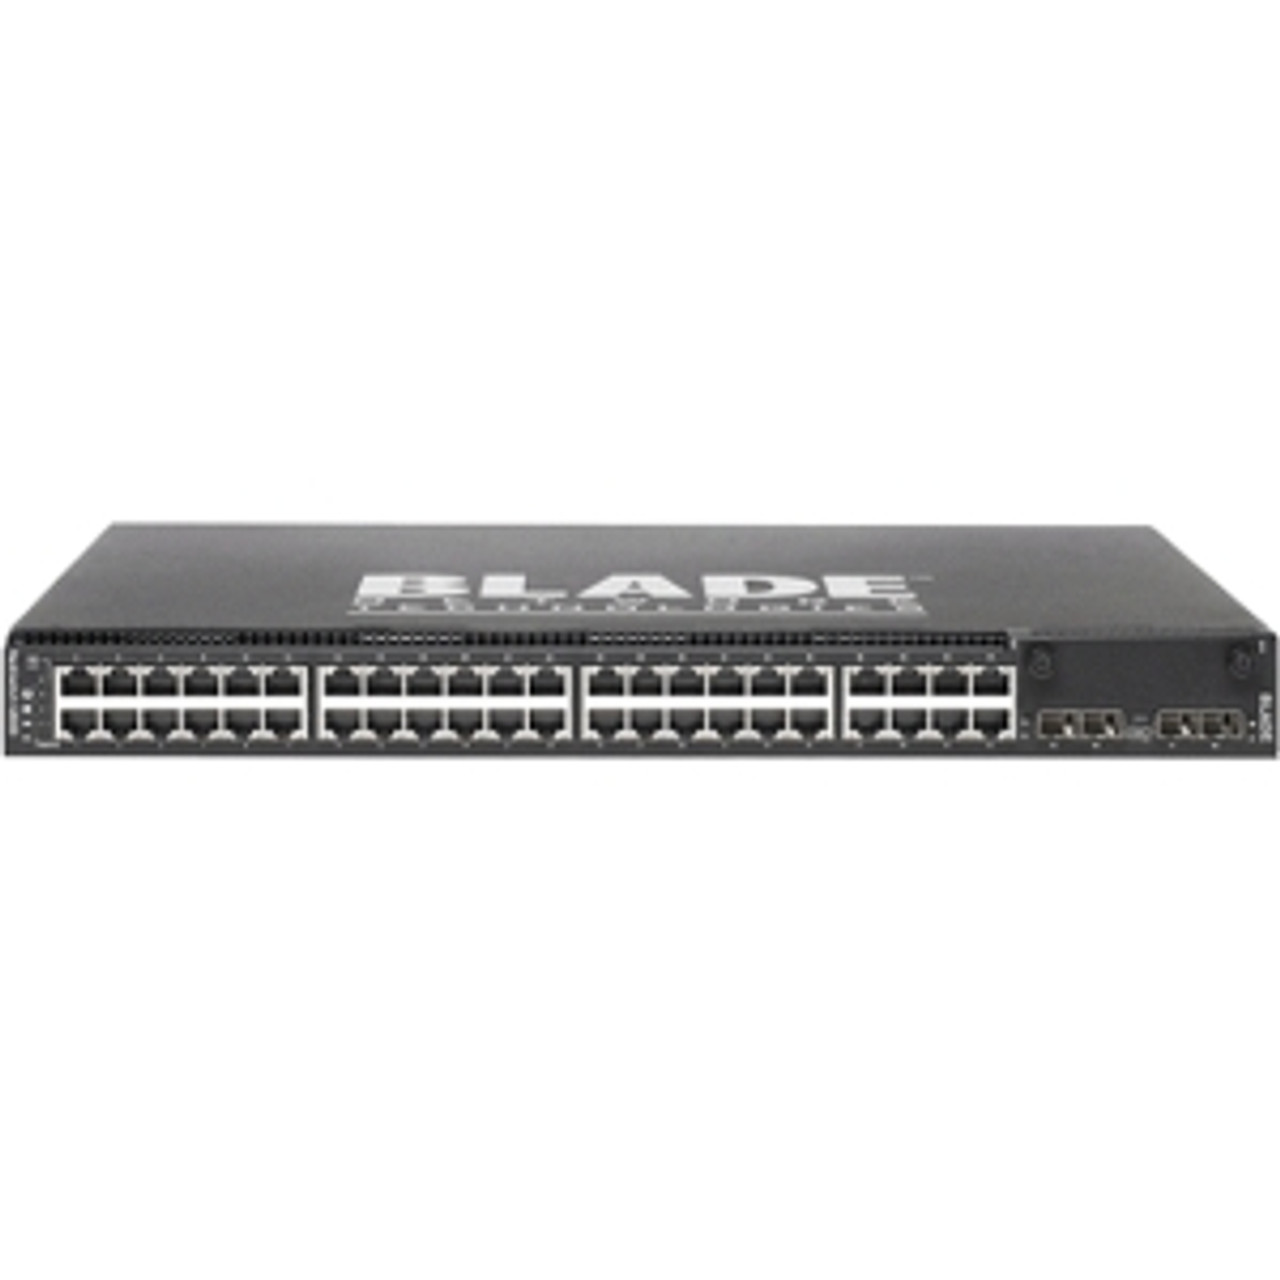 7309CFC IBM RackSwitch G8000F Layer 3 Switch 44 Port Manageable 44 x RJ-45 Stack Port 6 x Expansion Slots 10/100/1000Base-T (Refurbished)